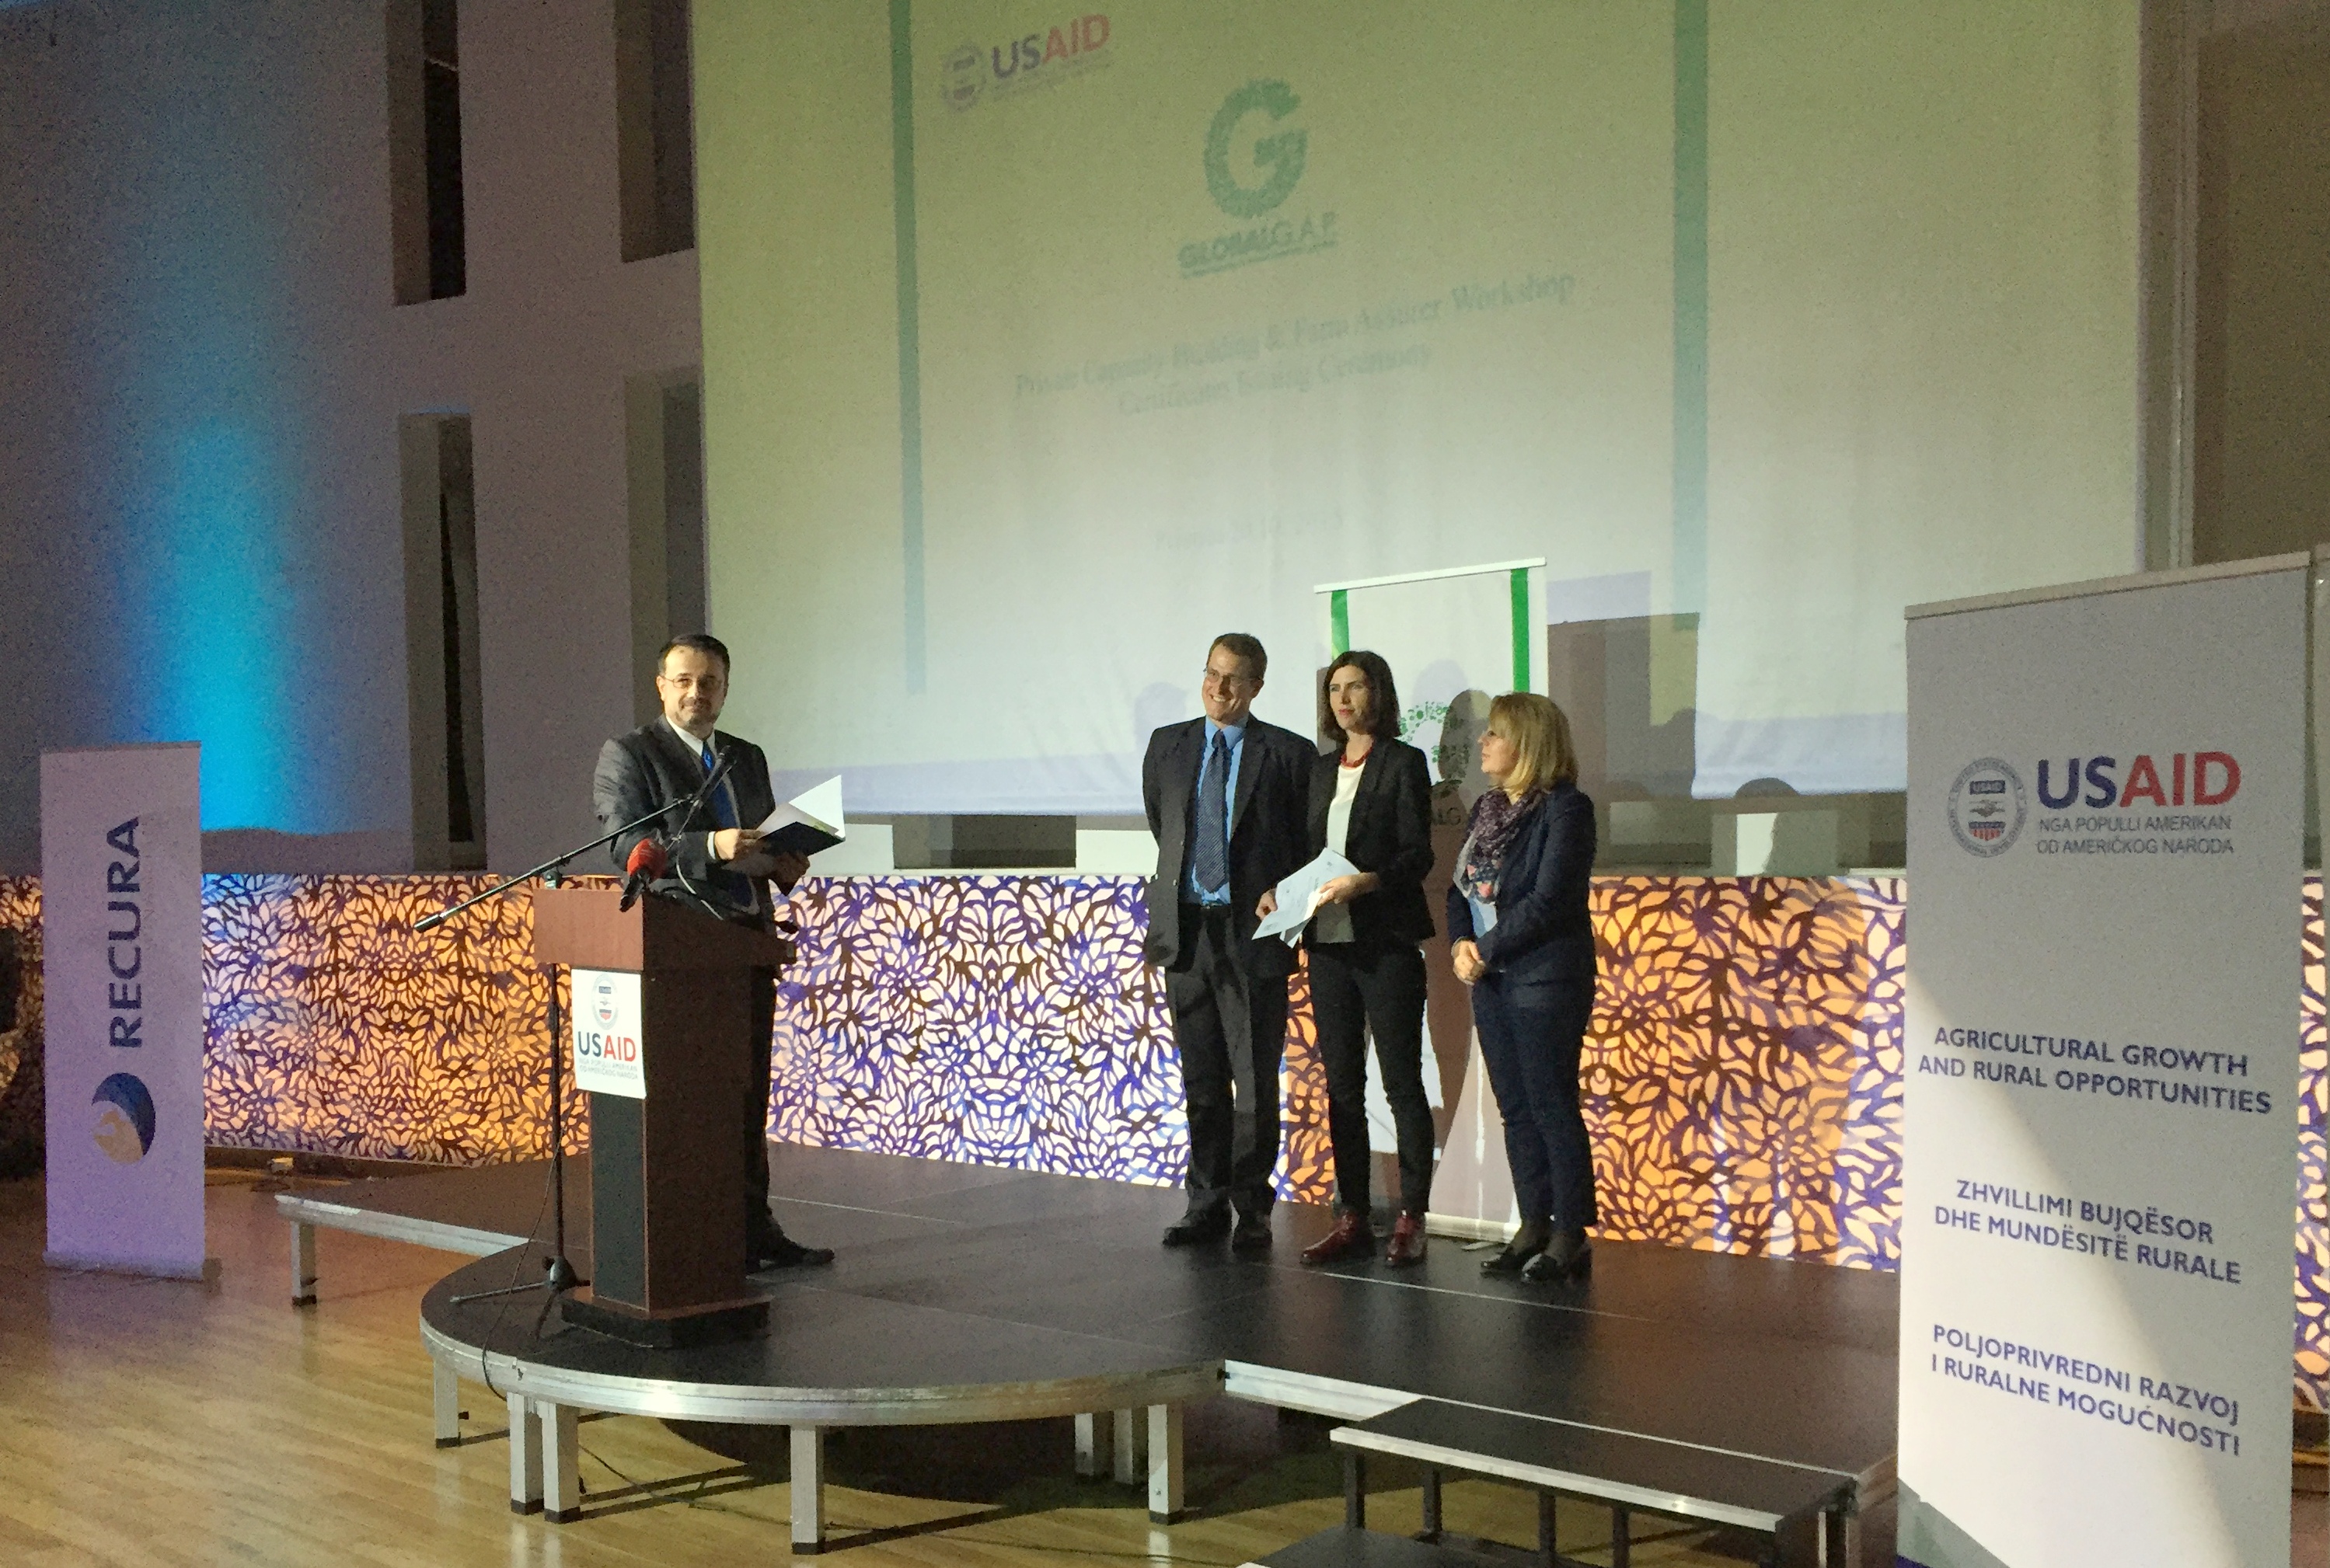 GLOBALG.A.P. Certificates Awards Ceremony